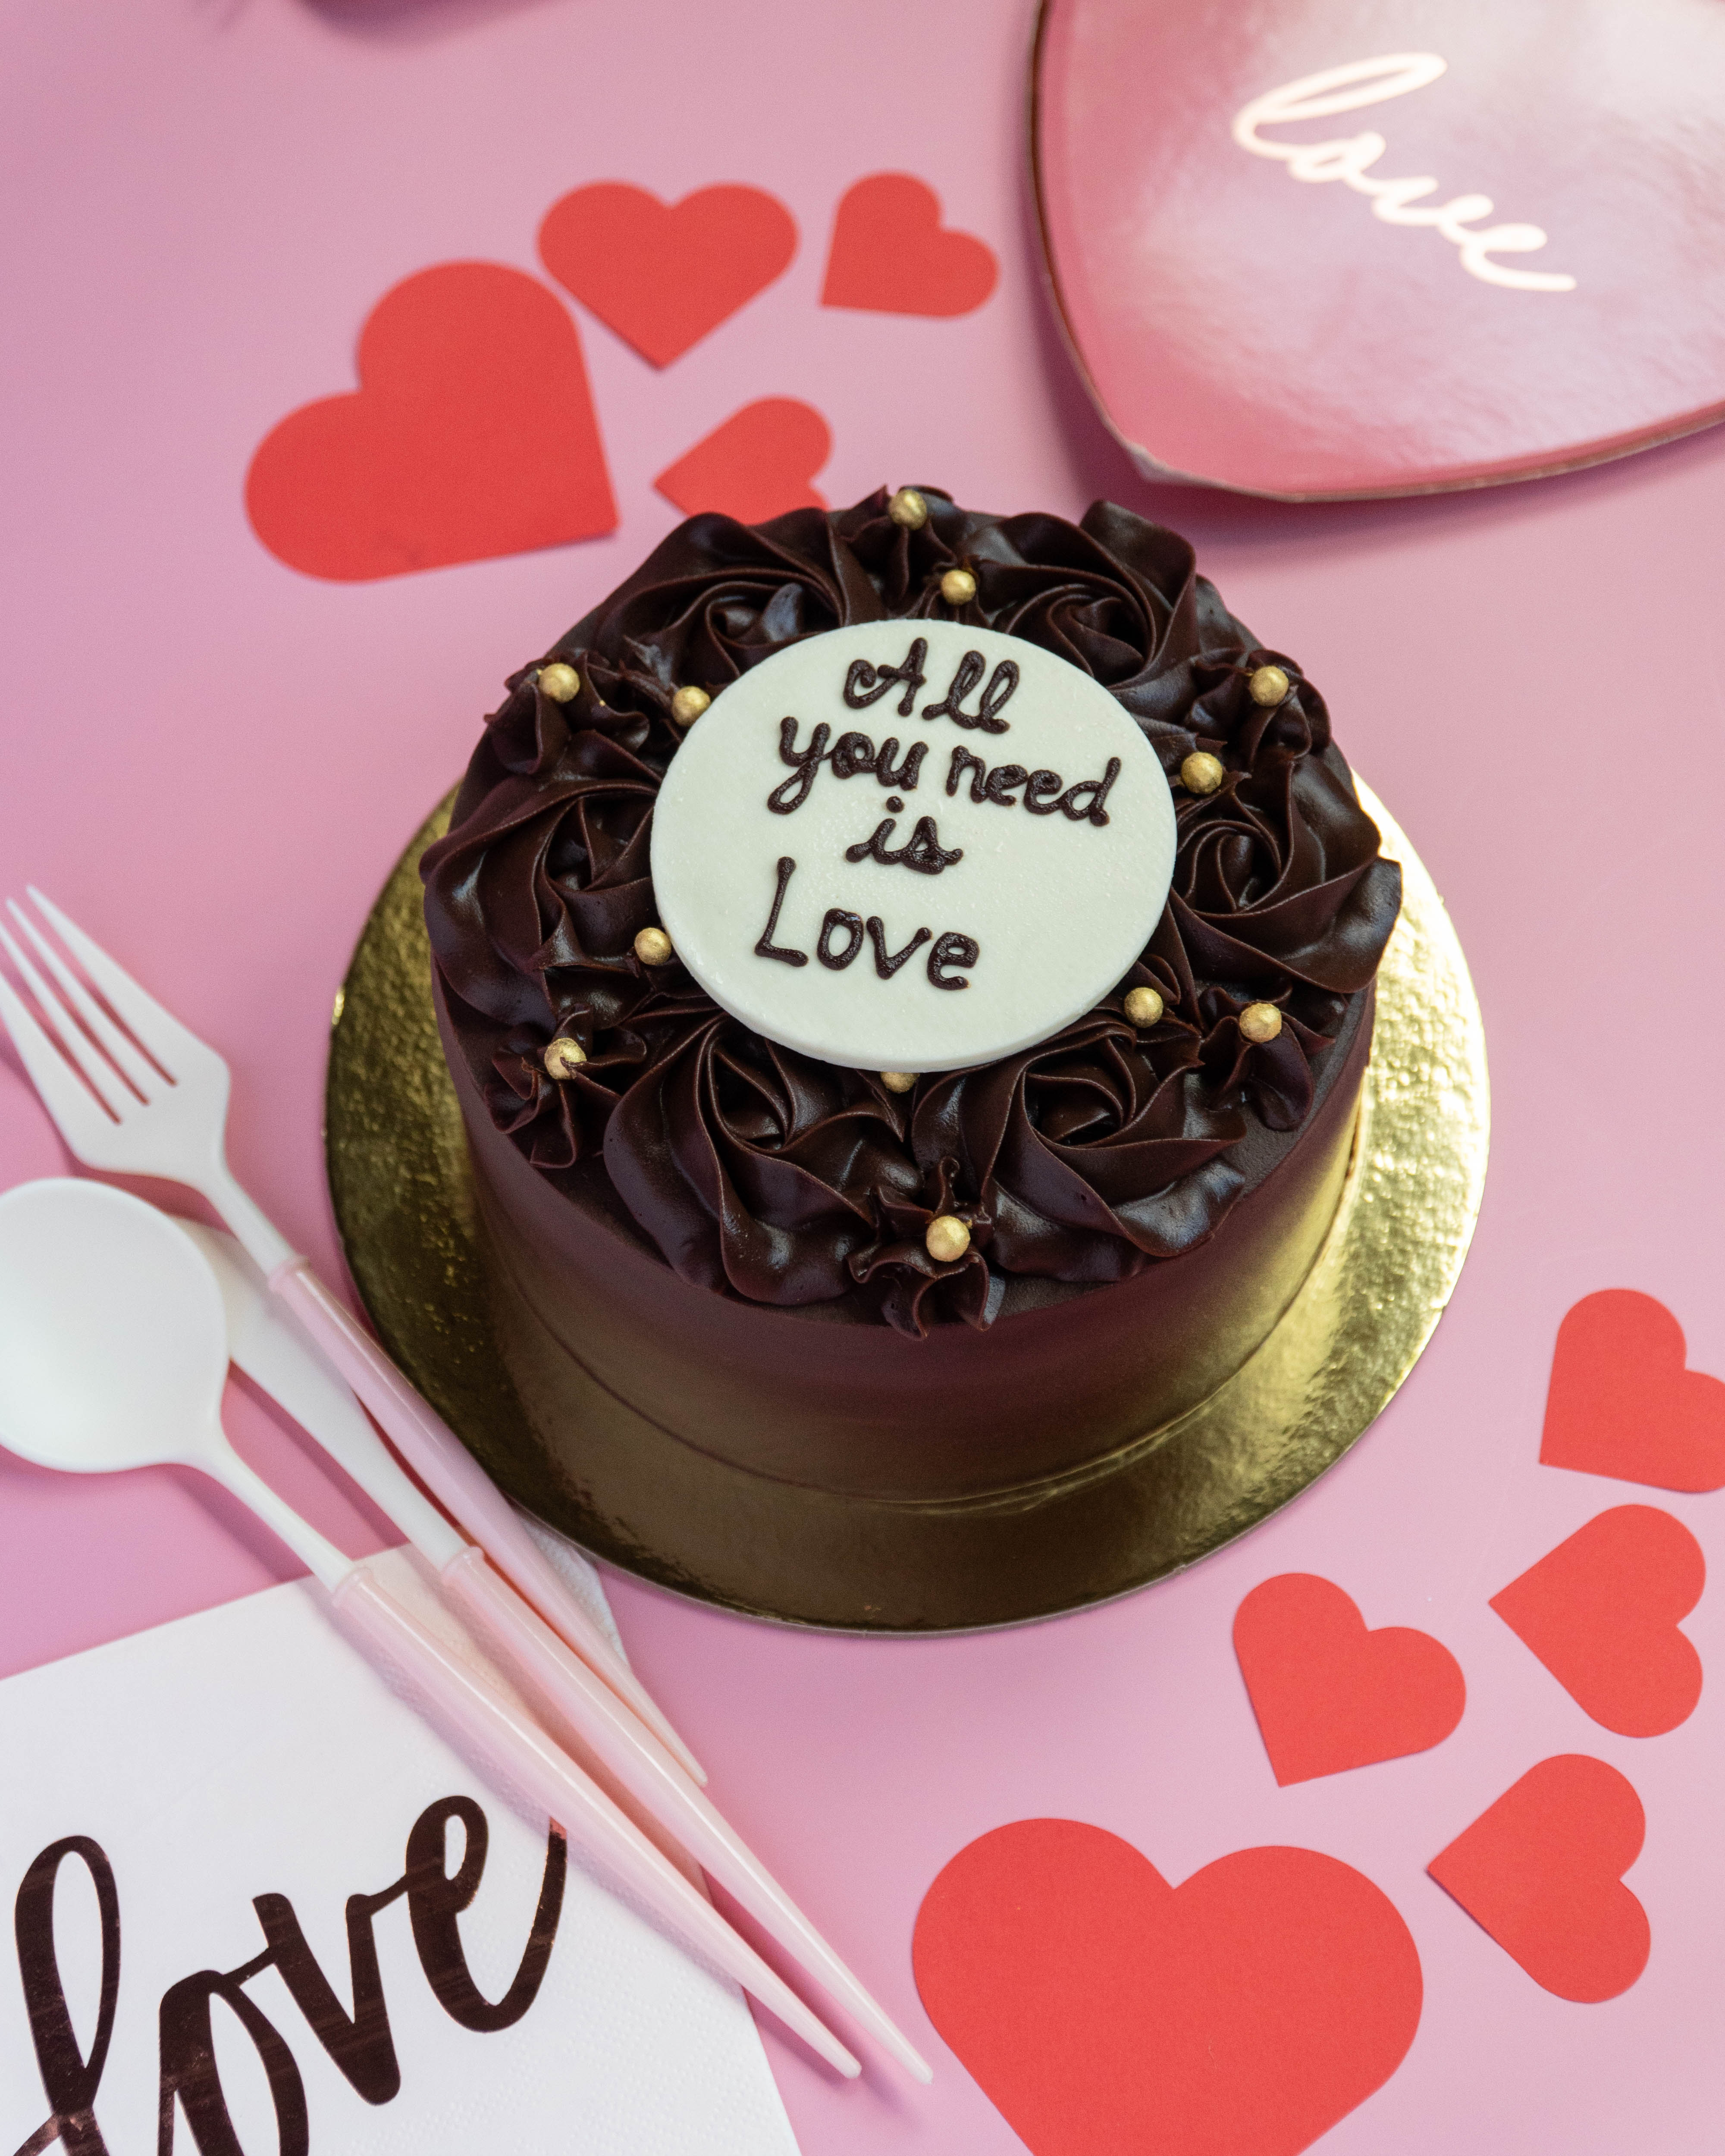 Buy/Send Chocolate Rose Cake Online Gifts | Wish For Gift